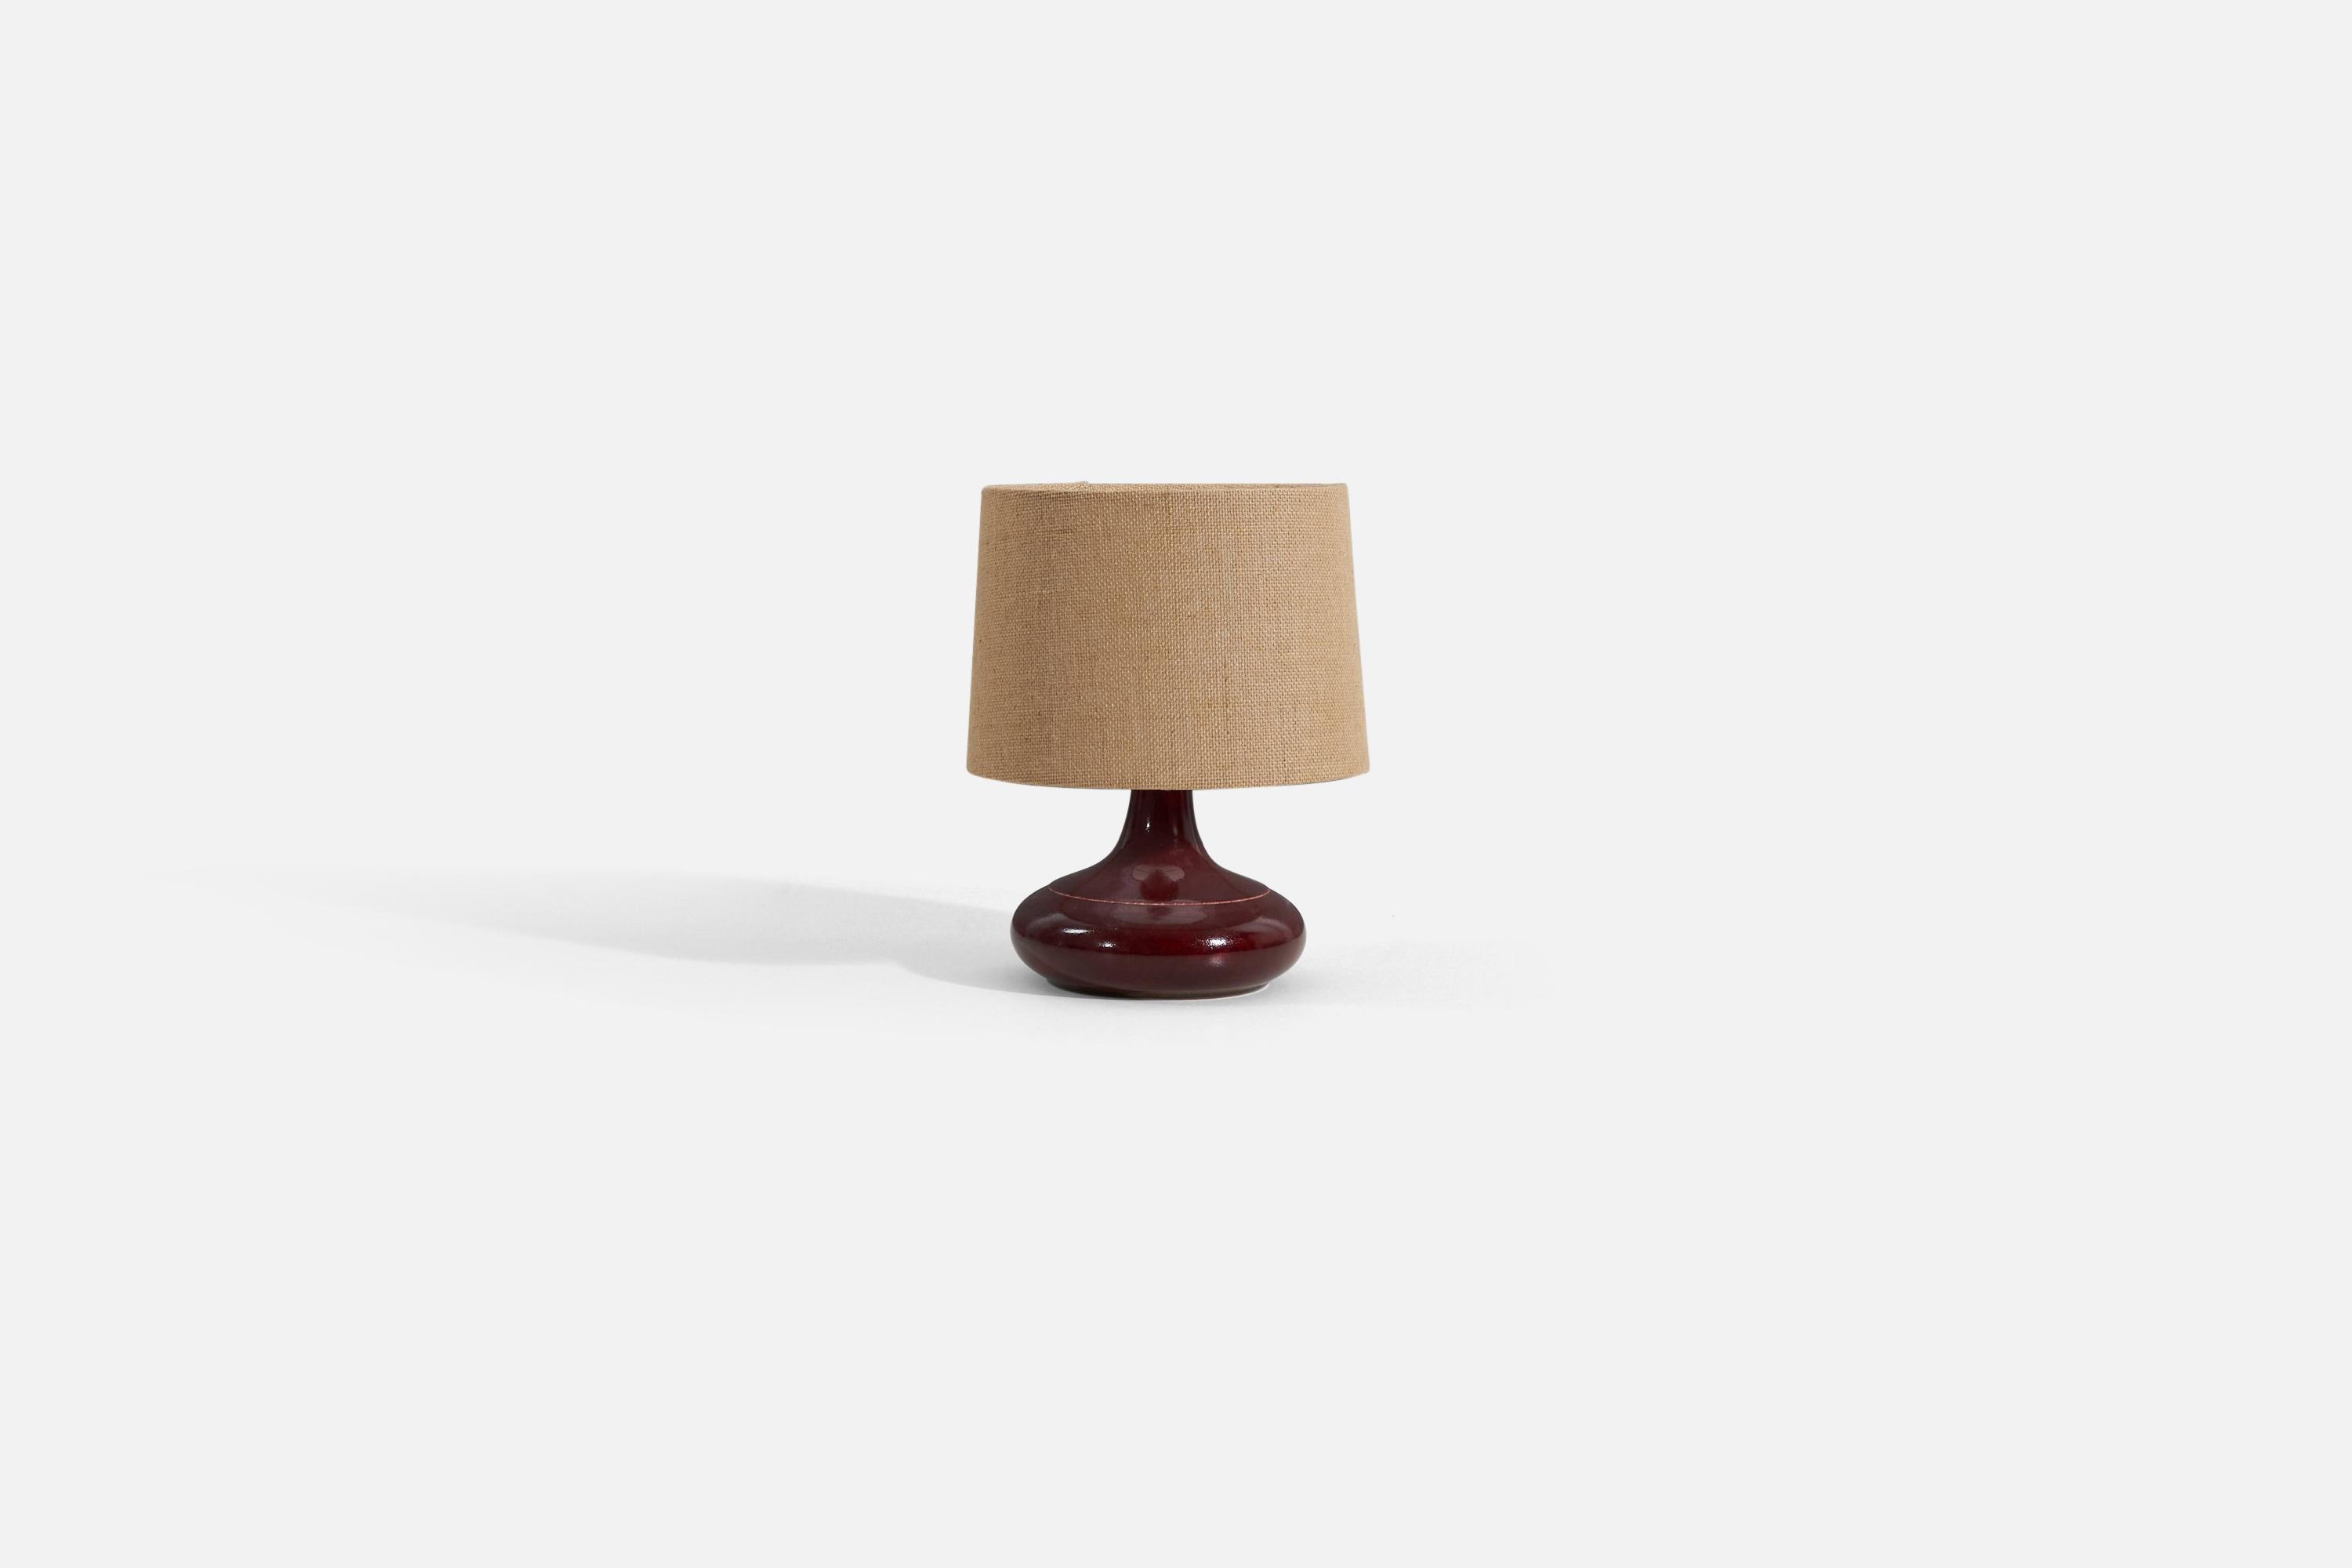 A red / Burgundy table lamp, designed and produced by Desiree Stentøj, Denmark, 1960s. stamped to underside.

Sold without lampshade. Stated dimensions exclude lampshade. Height includes socket. Below dimensions for reference: 

Shade : 9 x 10 x